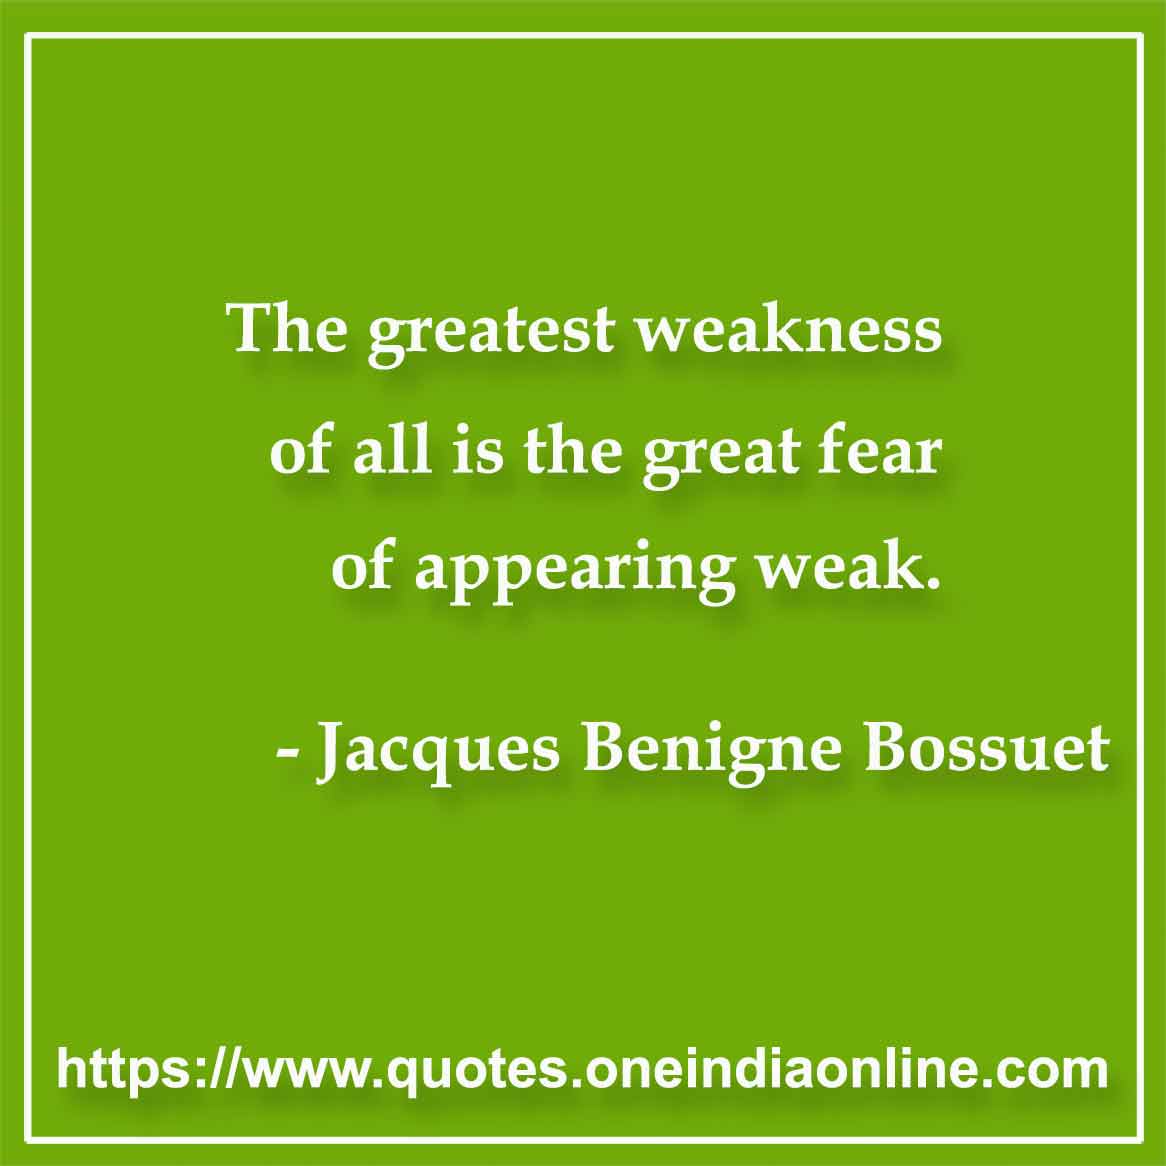 The greatest weakness of all is the great fear of appearing weak.

- Weakness Quotes by Jacques Benigne Bossuet